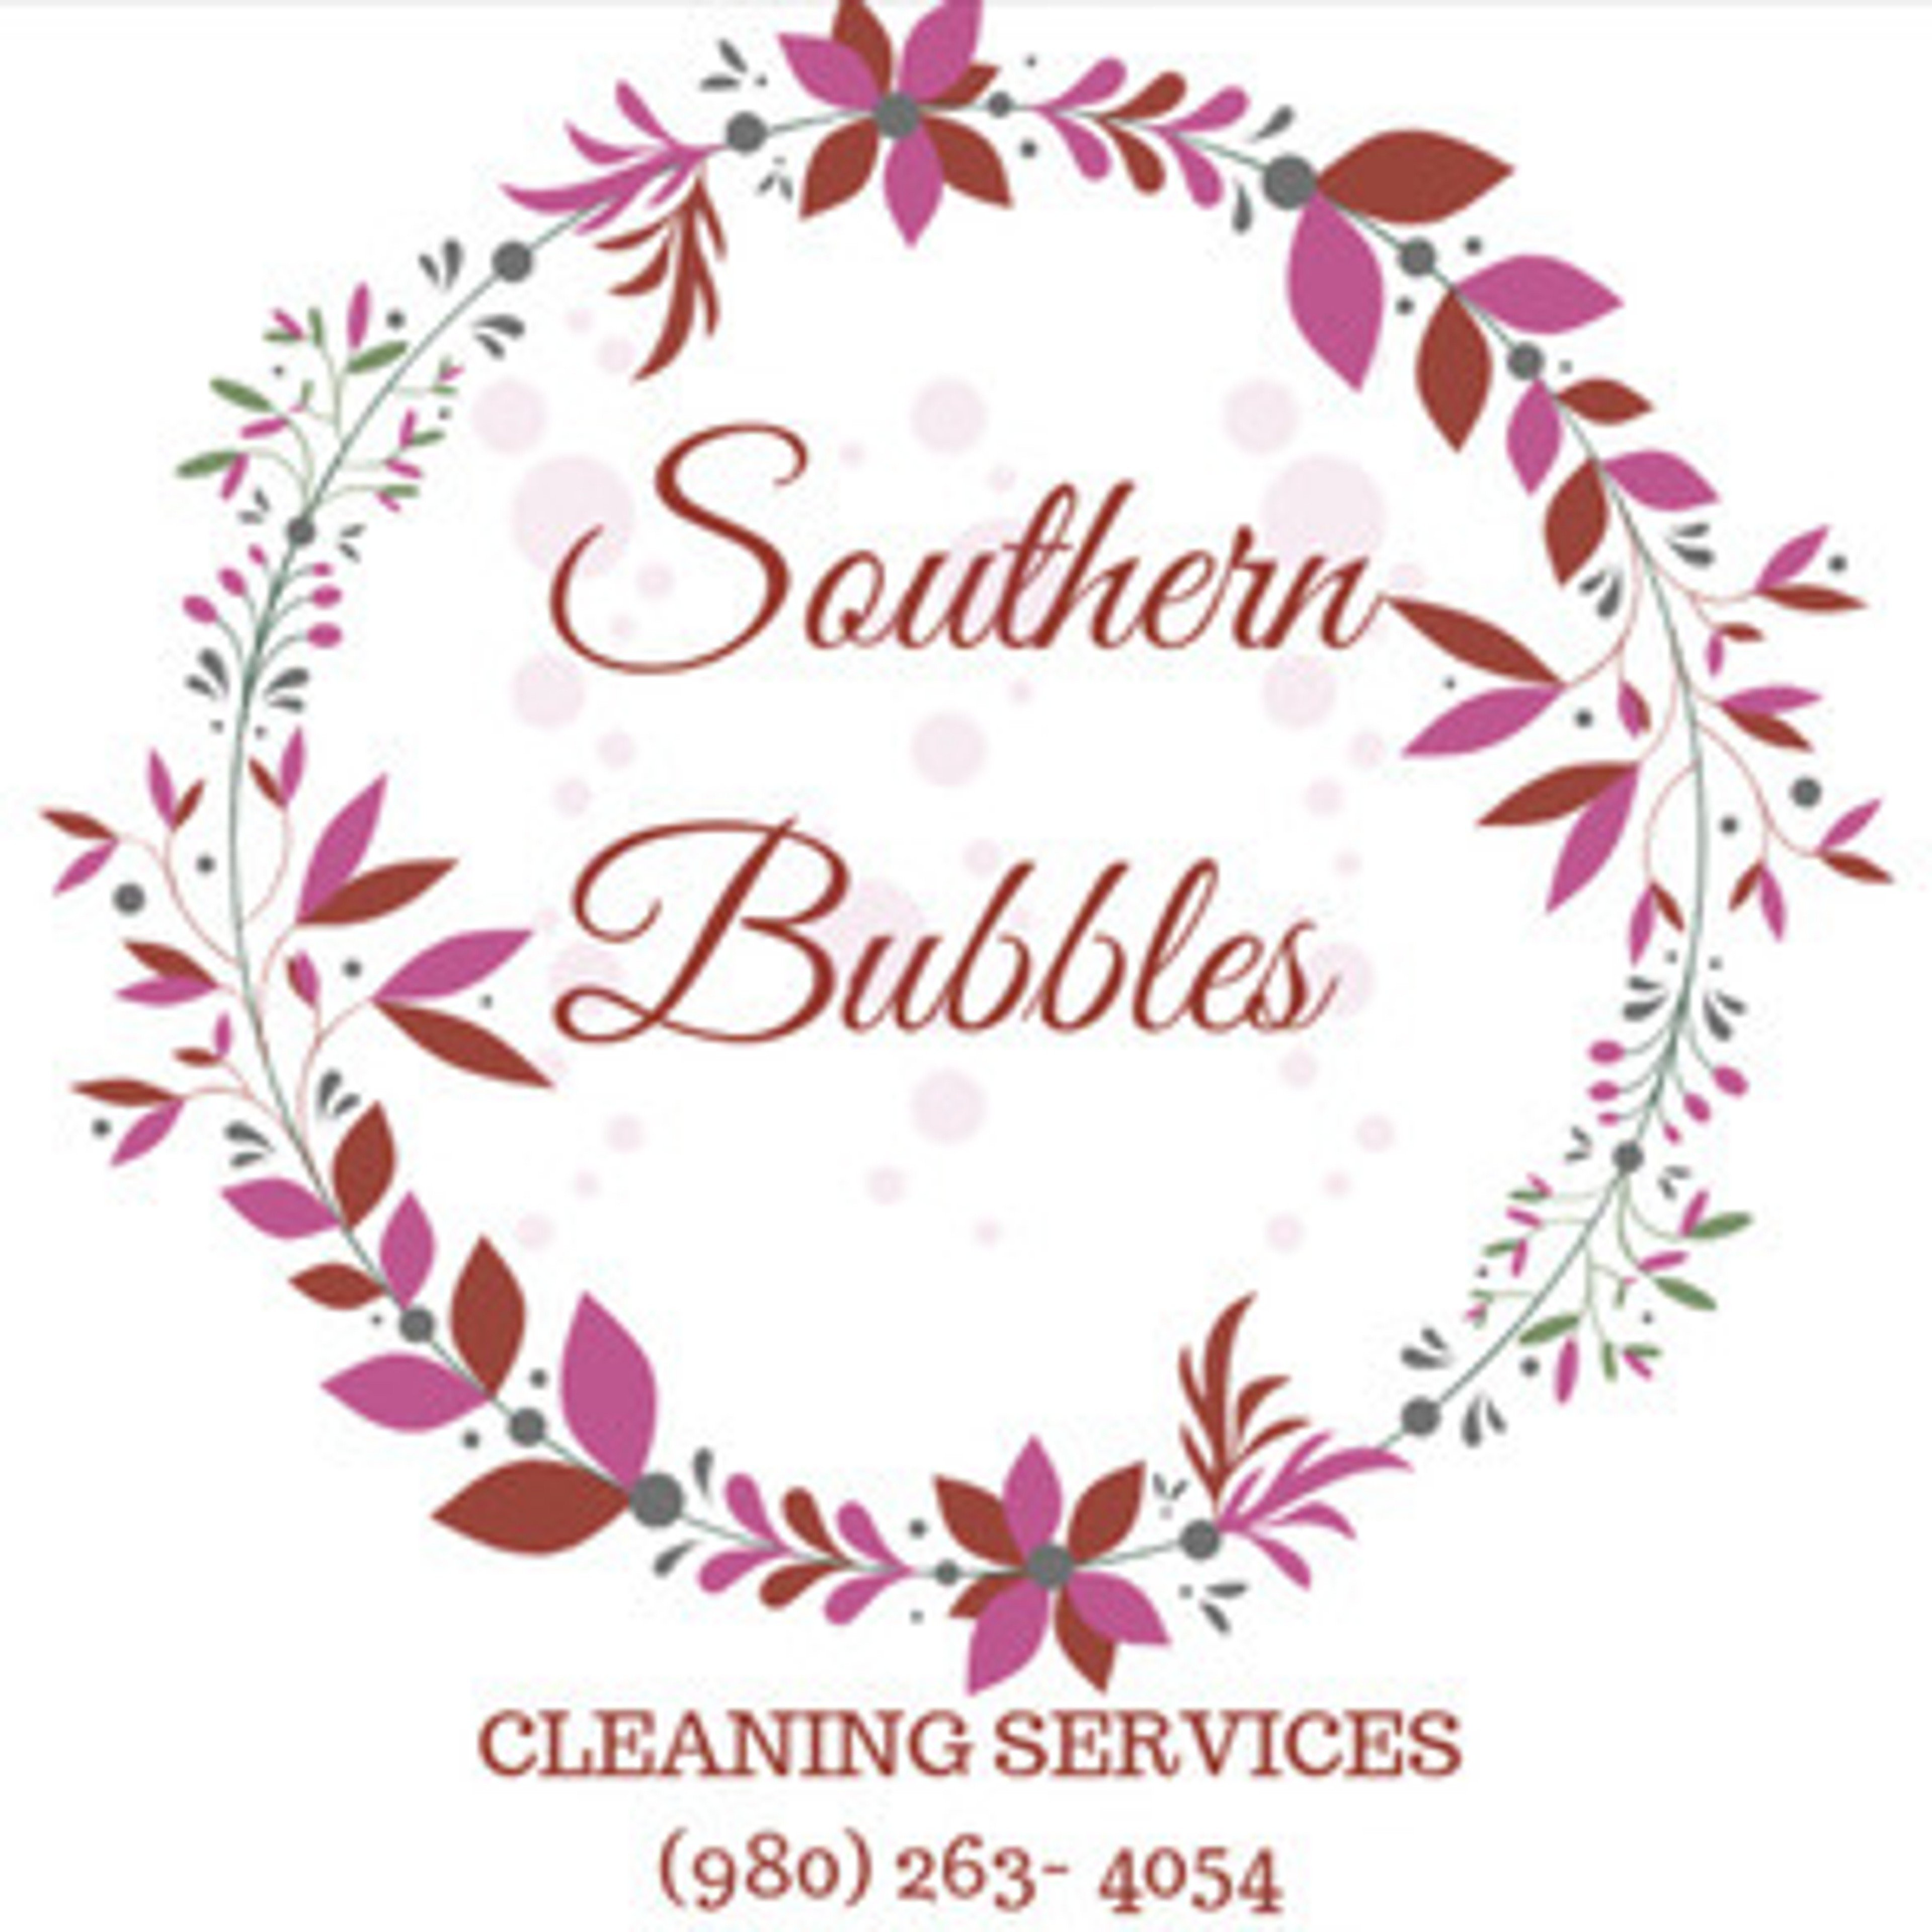 Southern Bubbles Cleaning Services ”Don’t stress, let me handle the mess!”